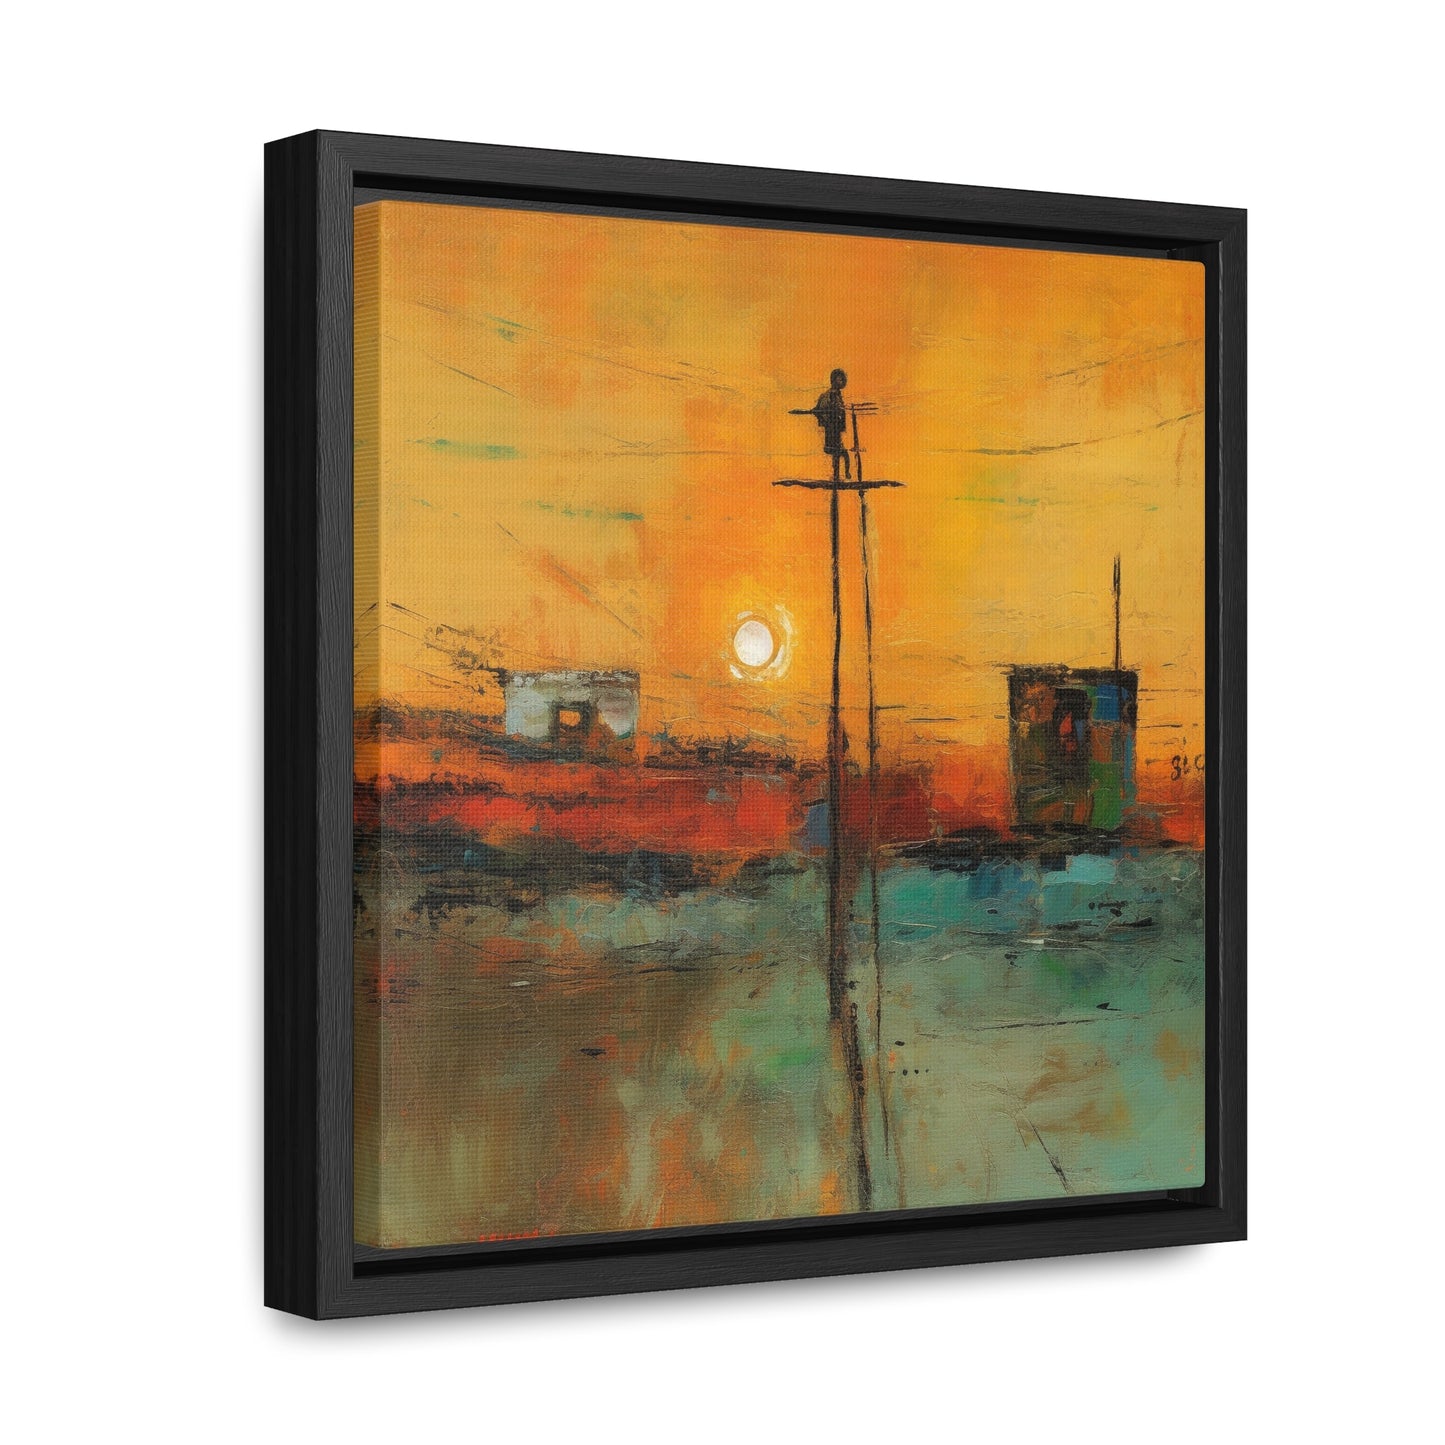 Land of the Sun 81, Valentinii, Gallery Canvas Wraps, Square Frame